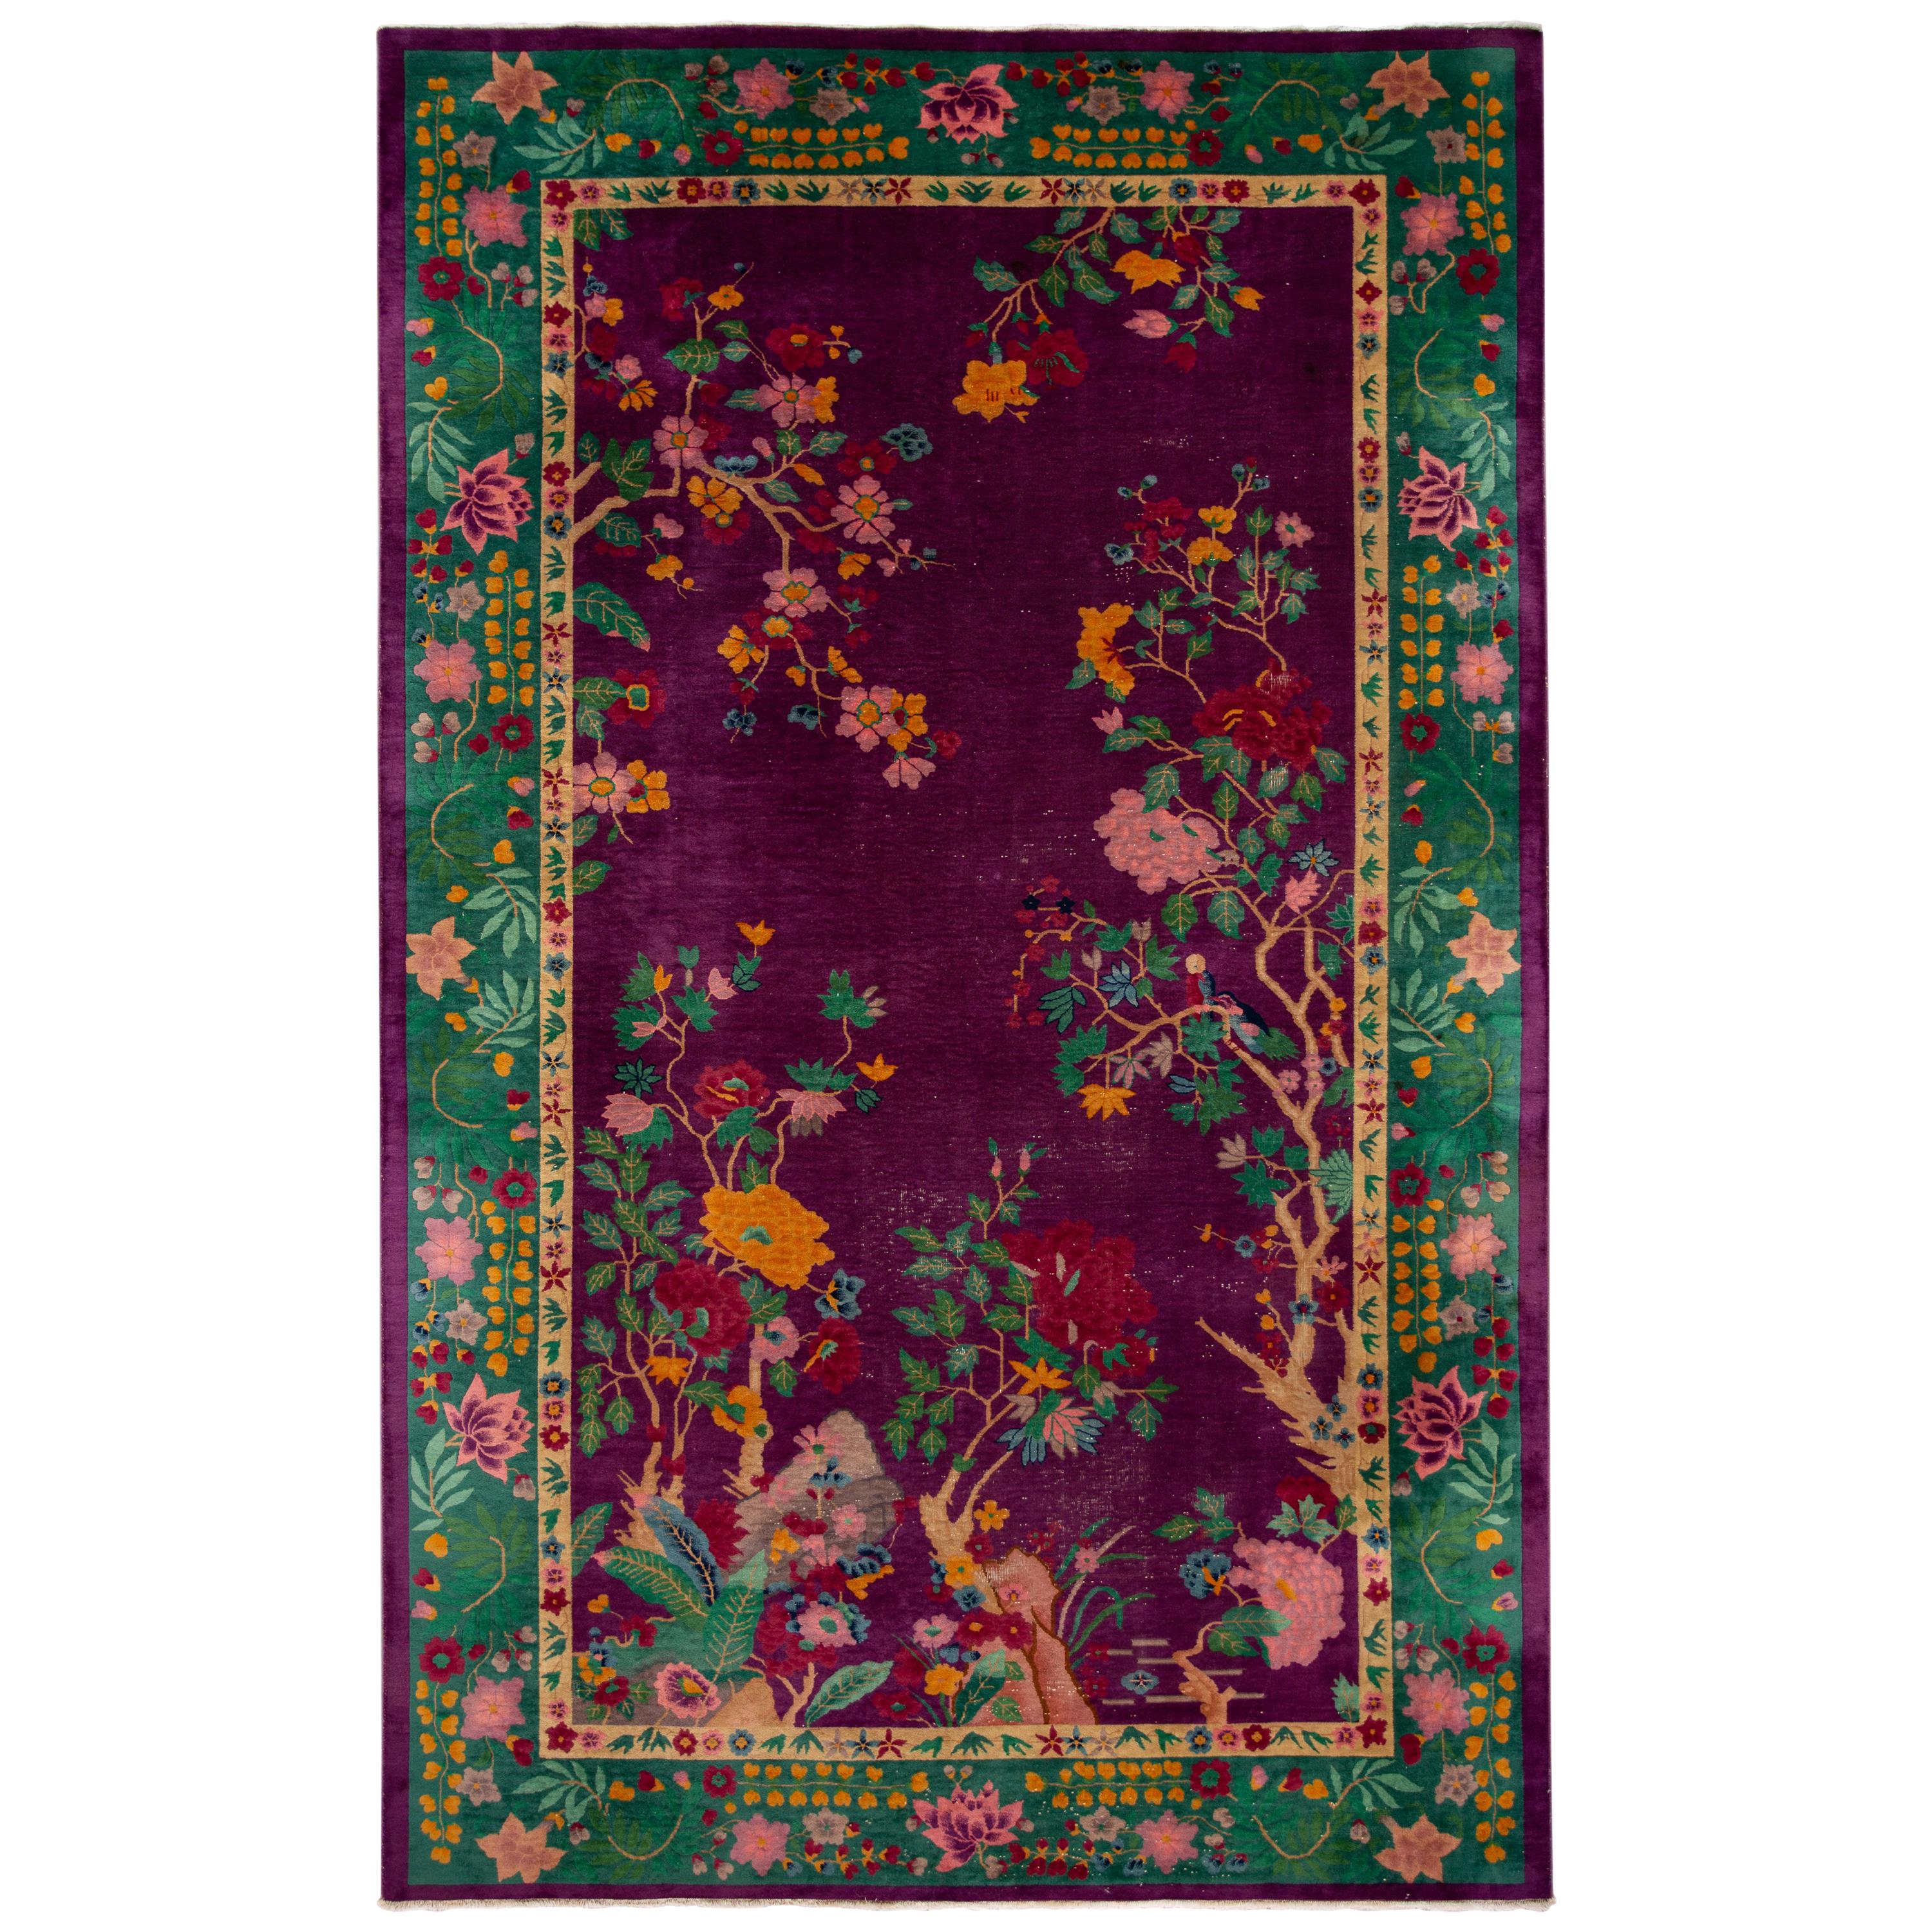 Antique Purple Art Deco Chinese Rug 8 Ft 9 In X 14 Ft 3 In. 